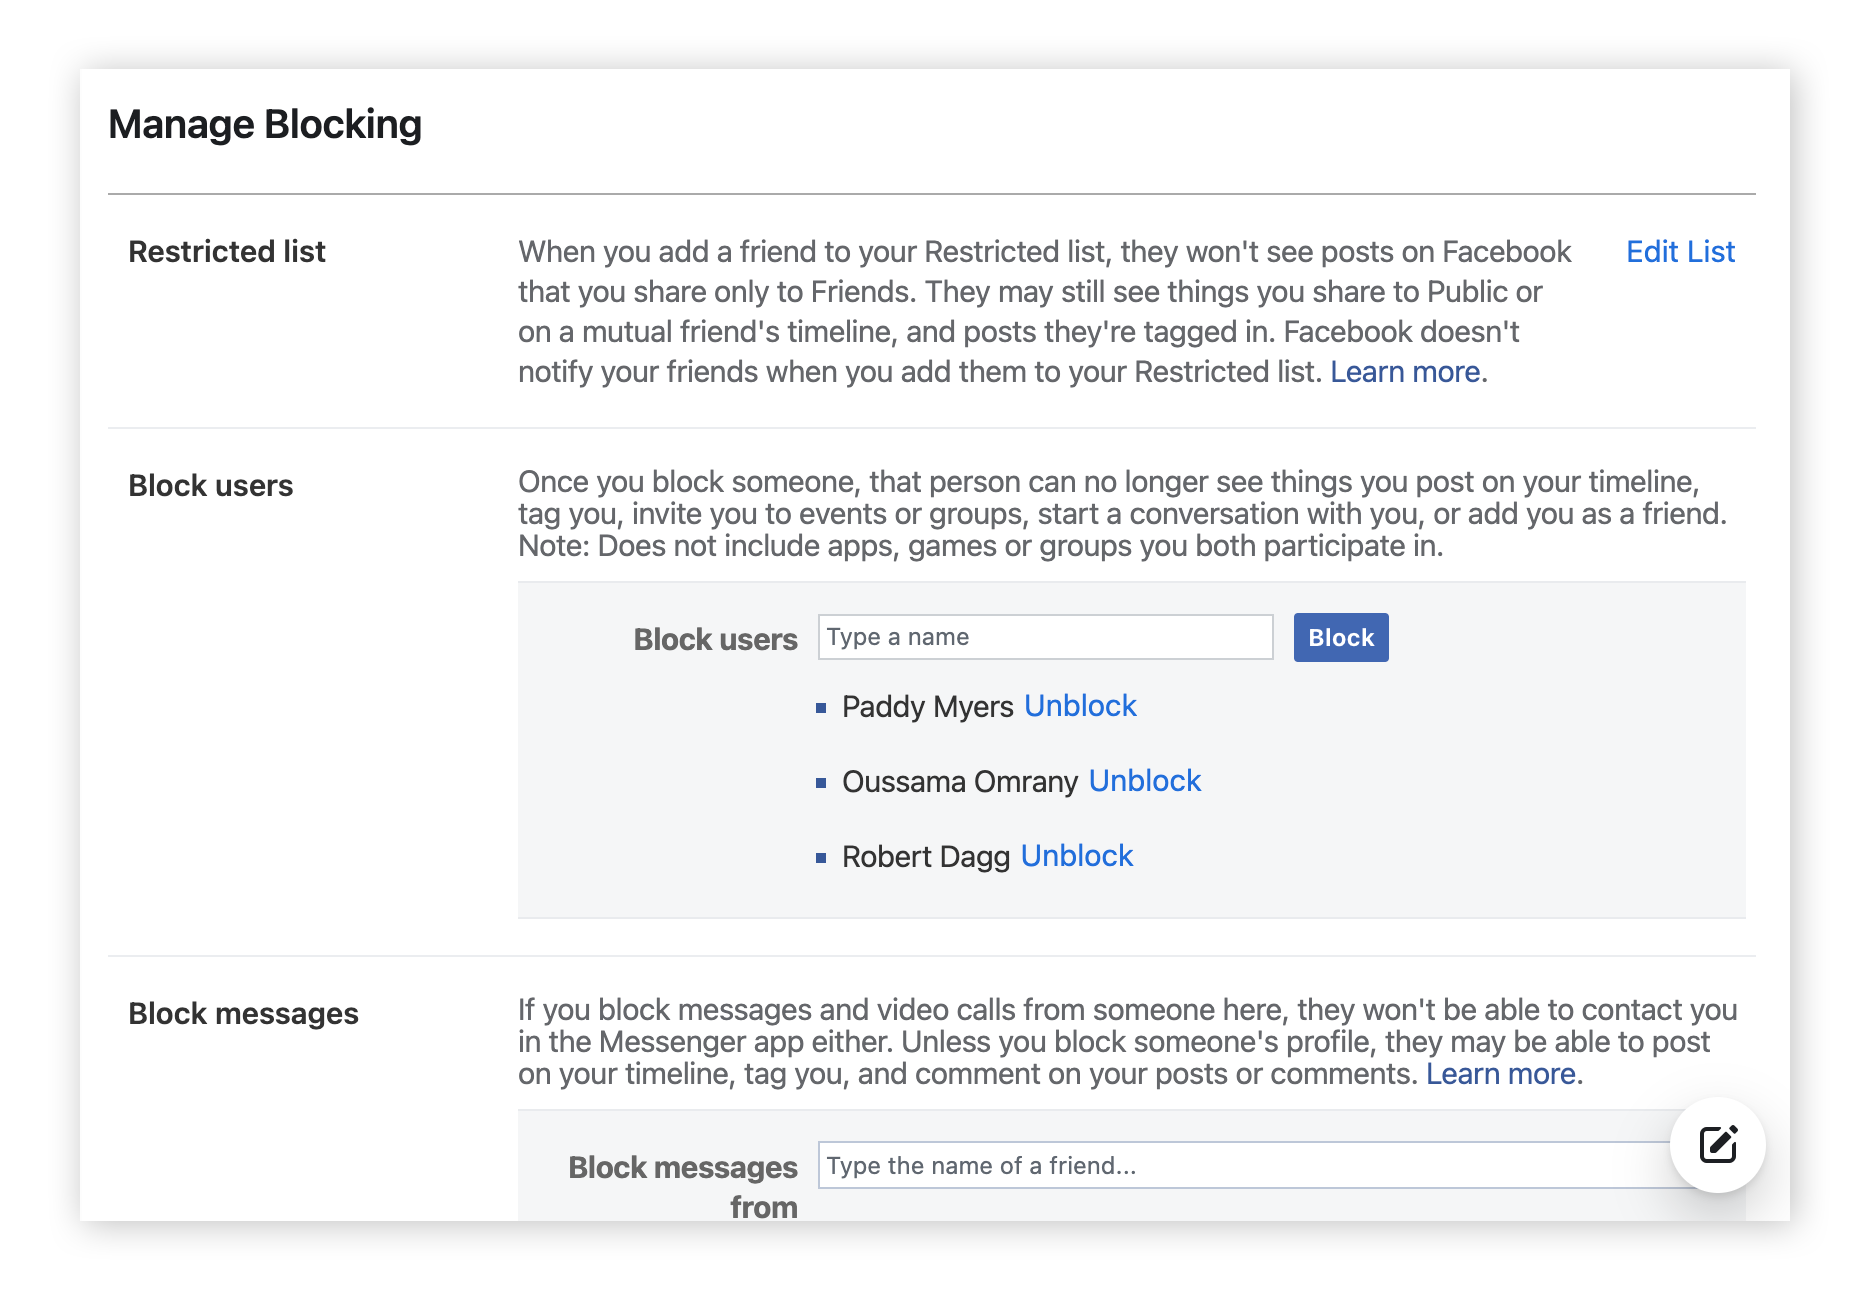 Choose which type of block you want to initiate on Facebook; a user, a message, or an event.